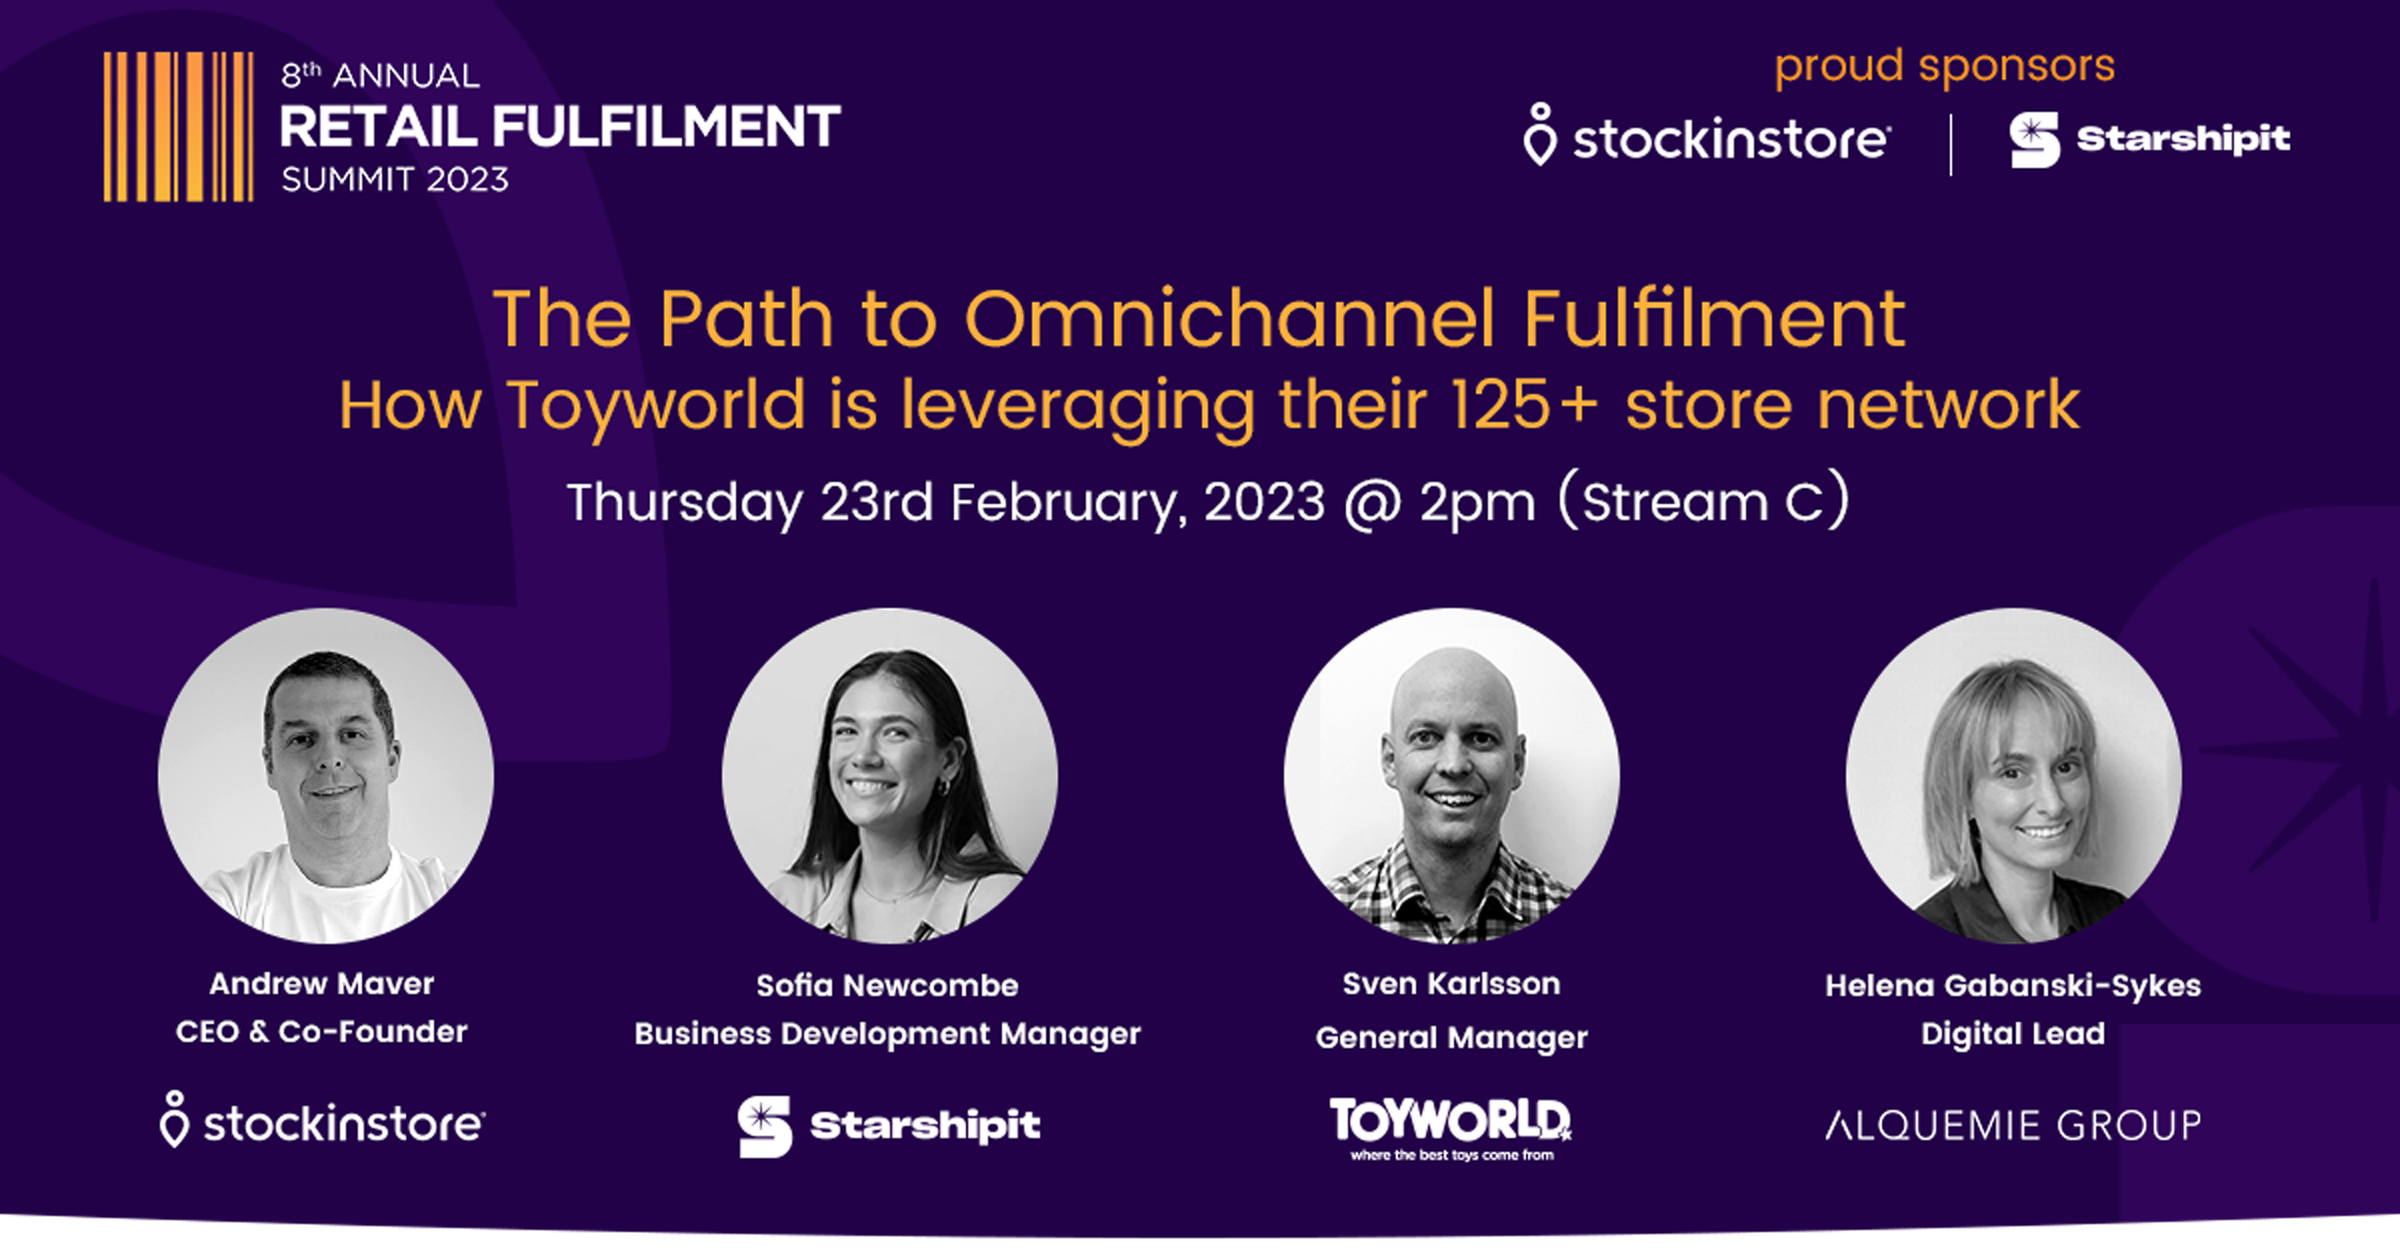 stockinstore® together with Starshipit are proud to be sponsors of the 2023 Retail Fulfilment Summit.